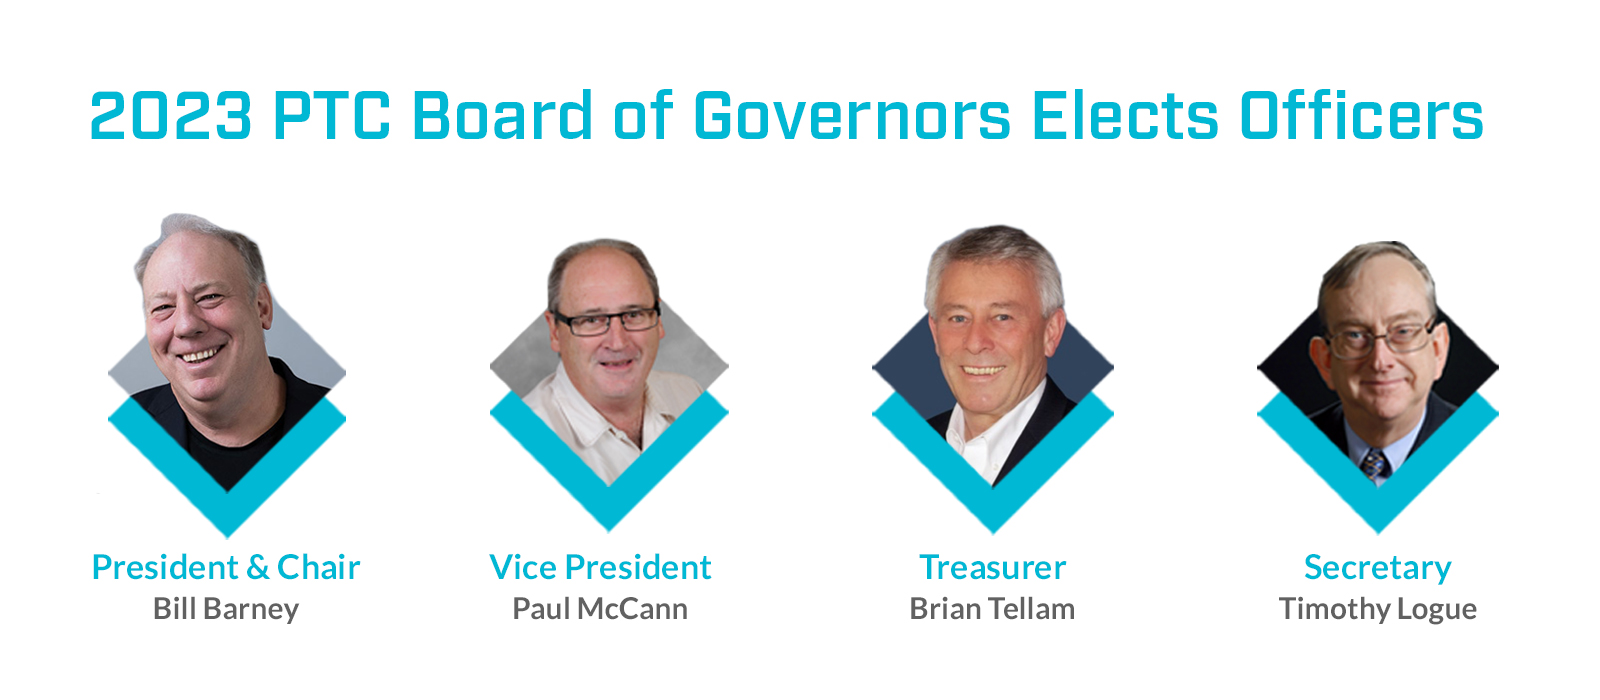 2023 PTC Board of Governors